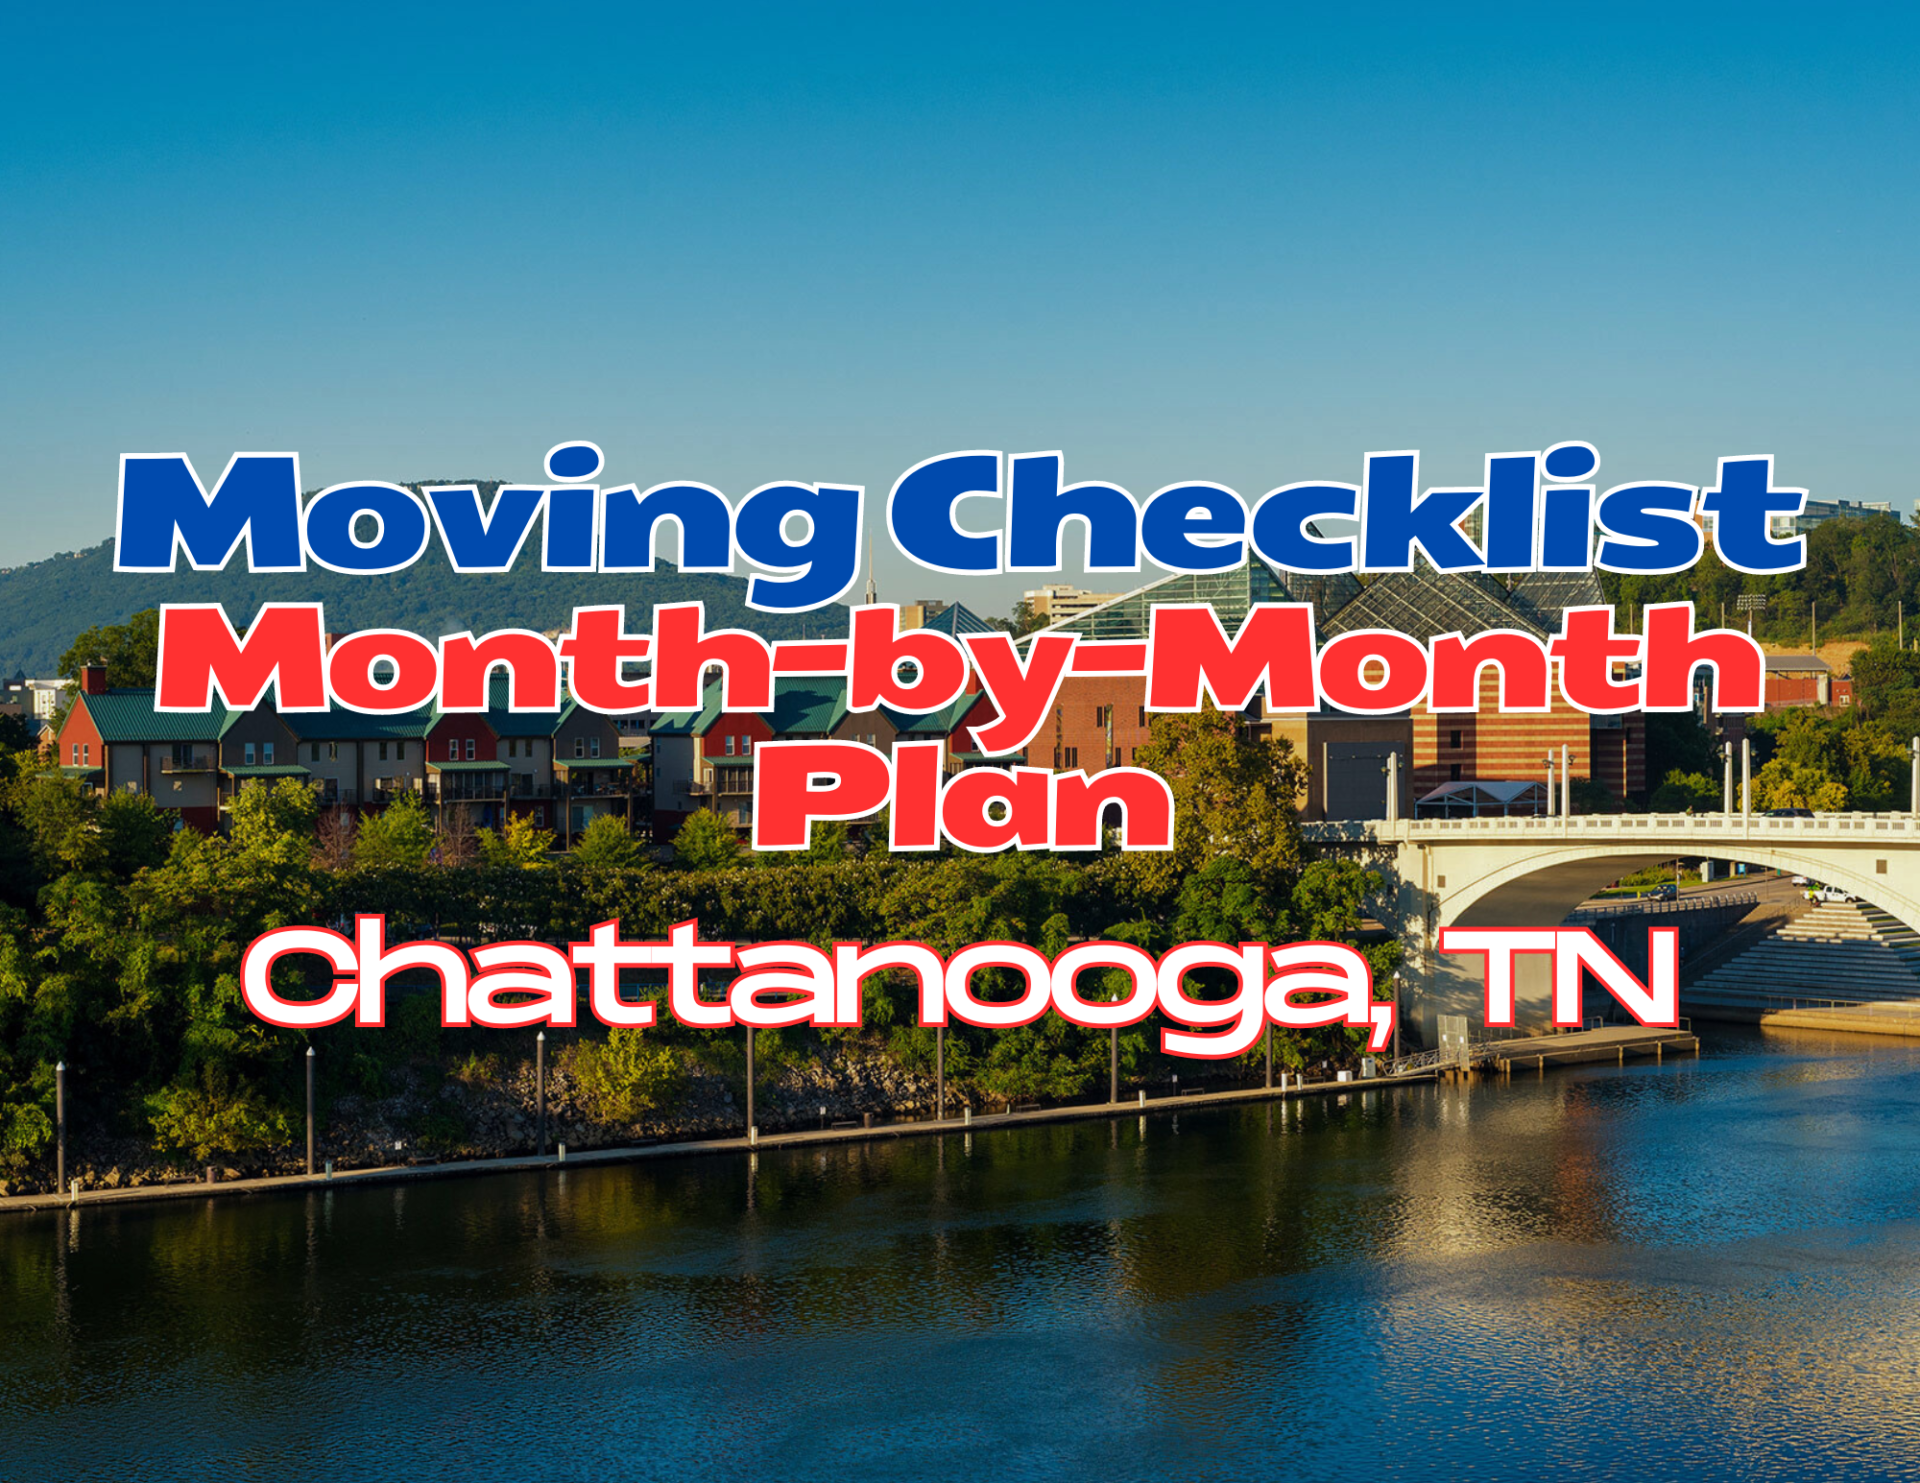 Moving Checklist TN Chattanooga TN Moving Checklist: A Month-by-Month Plan